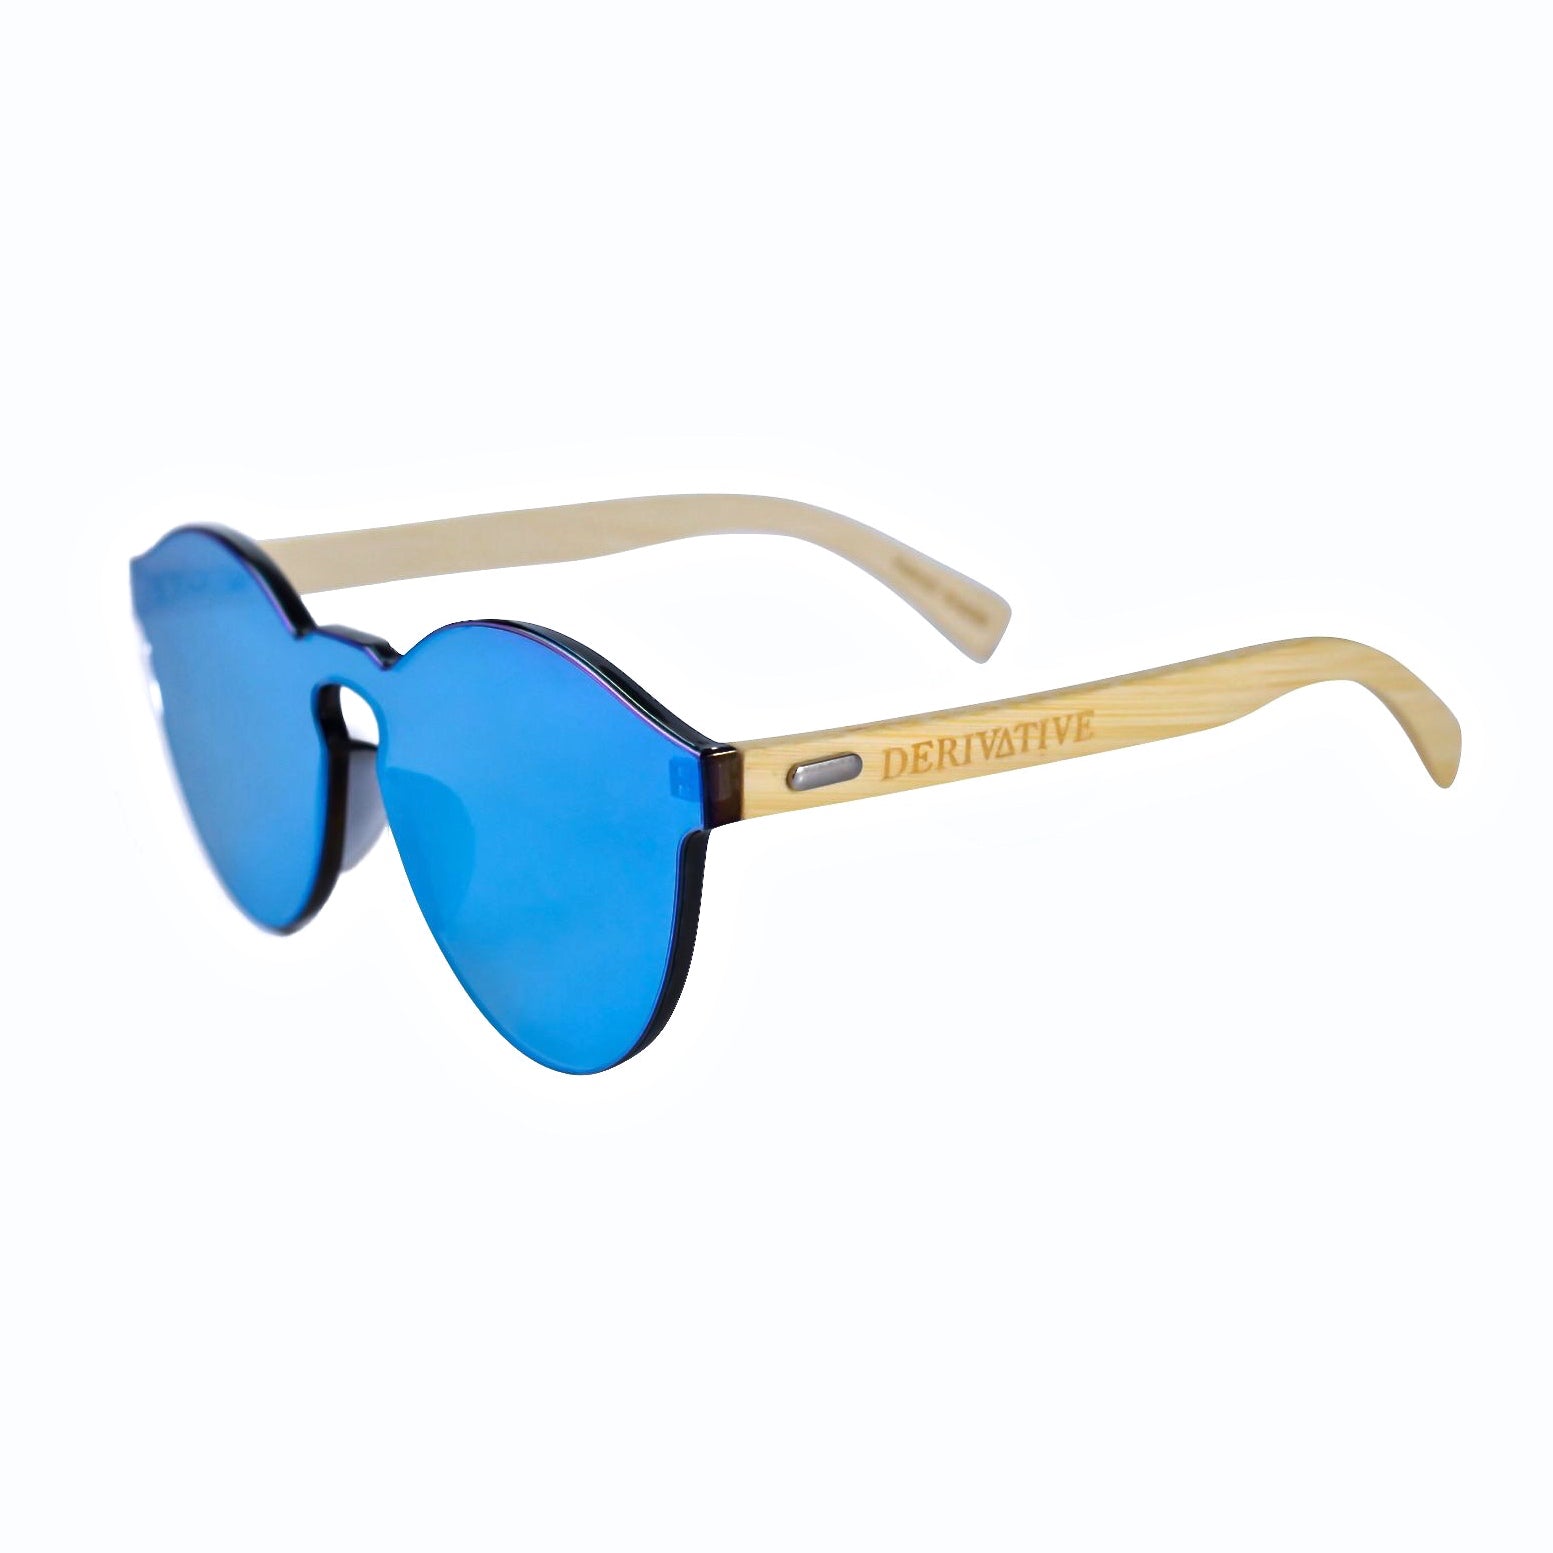 Blue Infinity Lens Rimless Sunglasses by Derivative